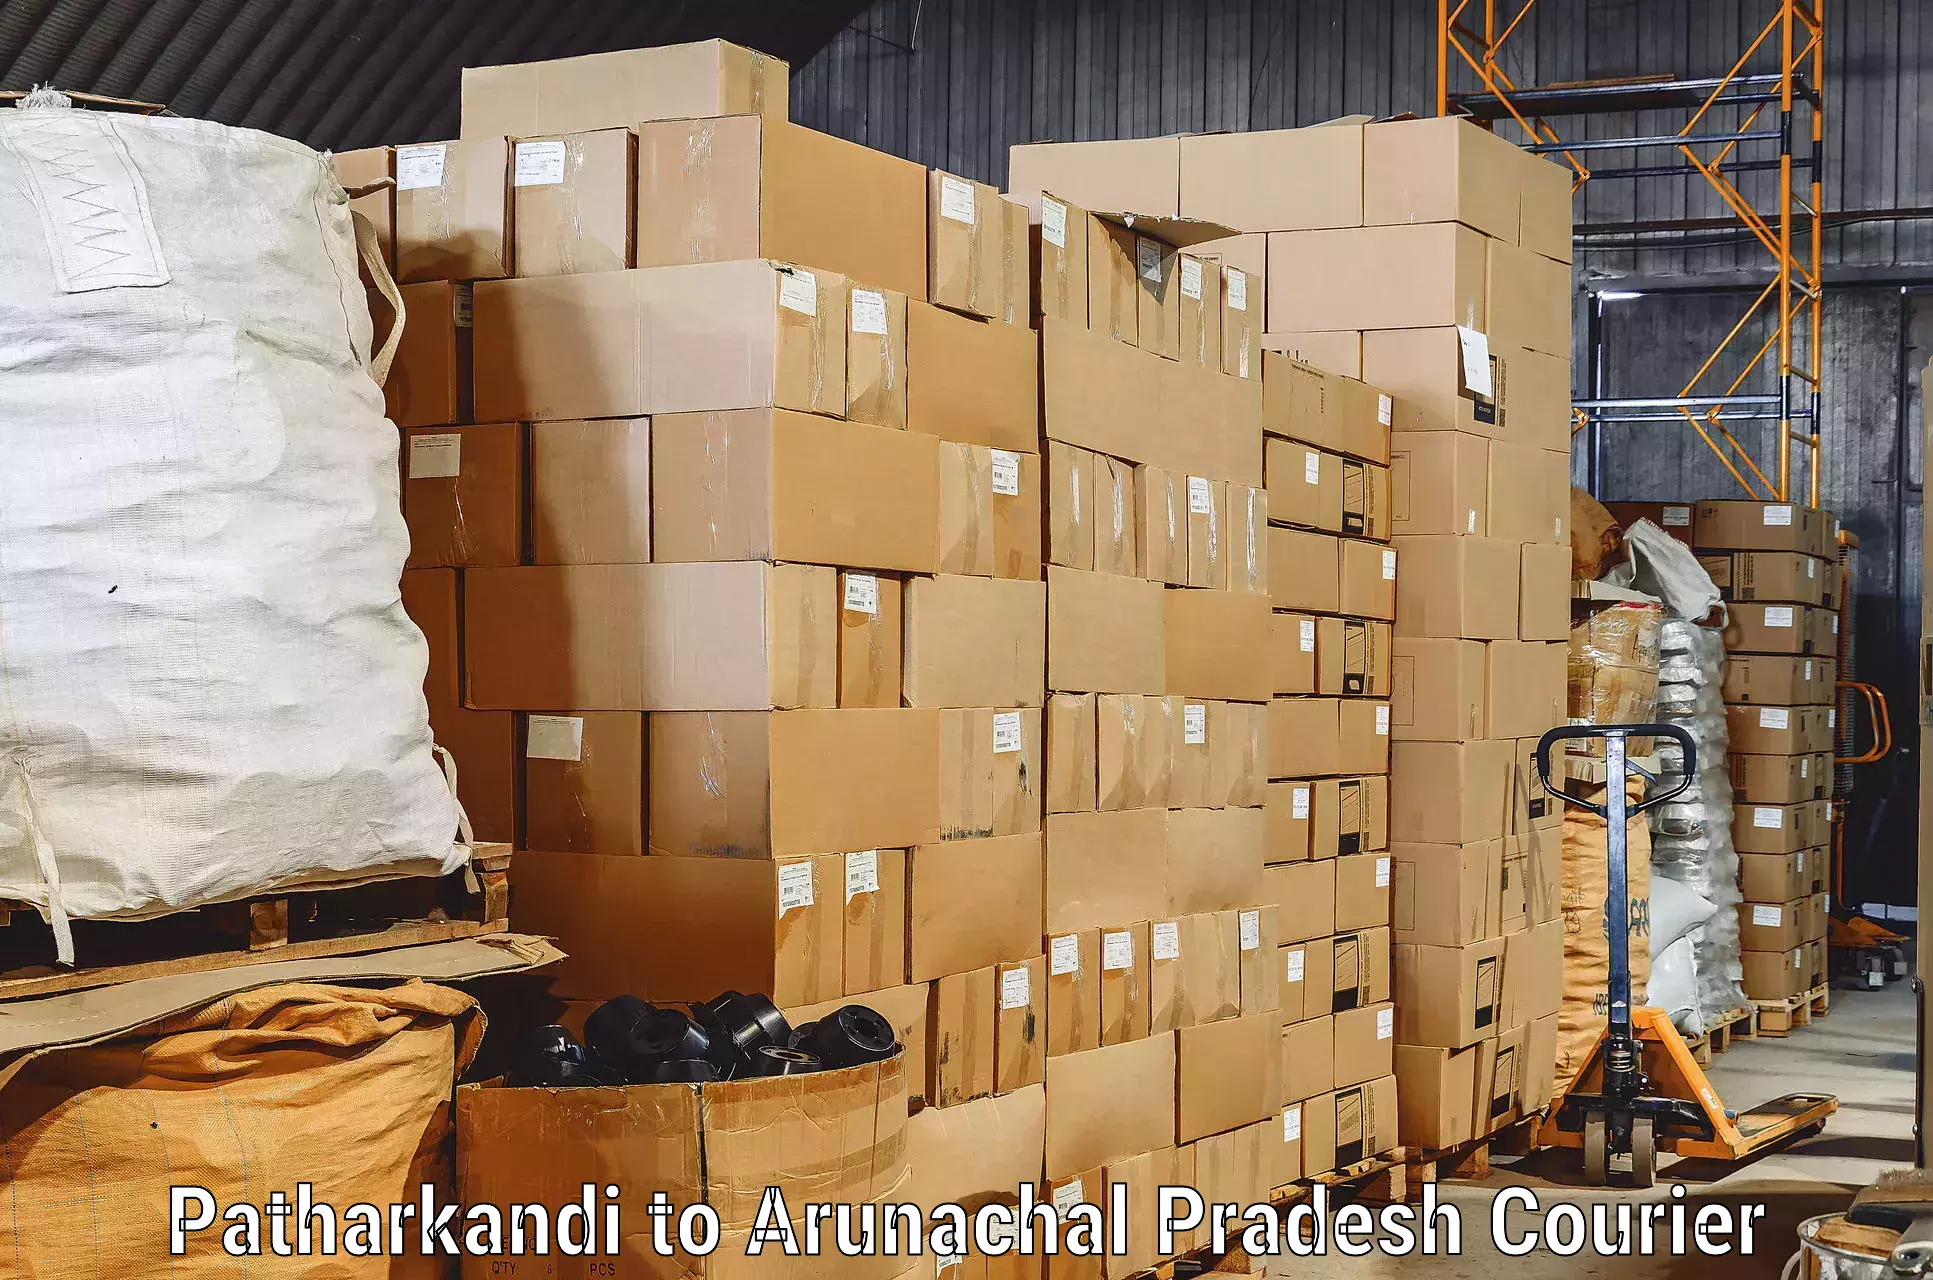 Reliable movers in Patharkandi to Aalo